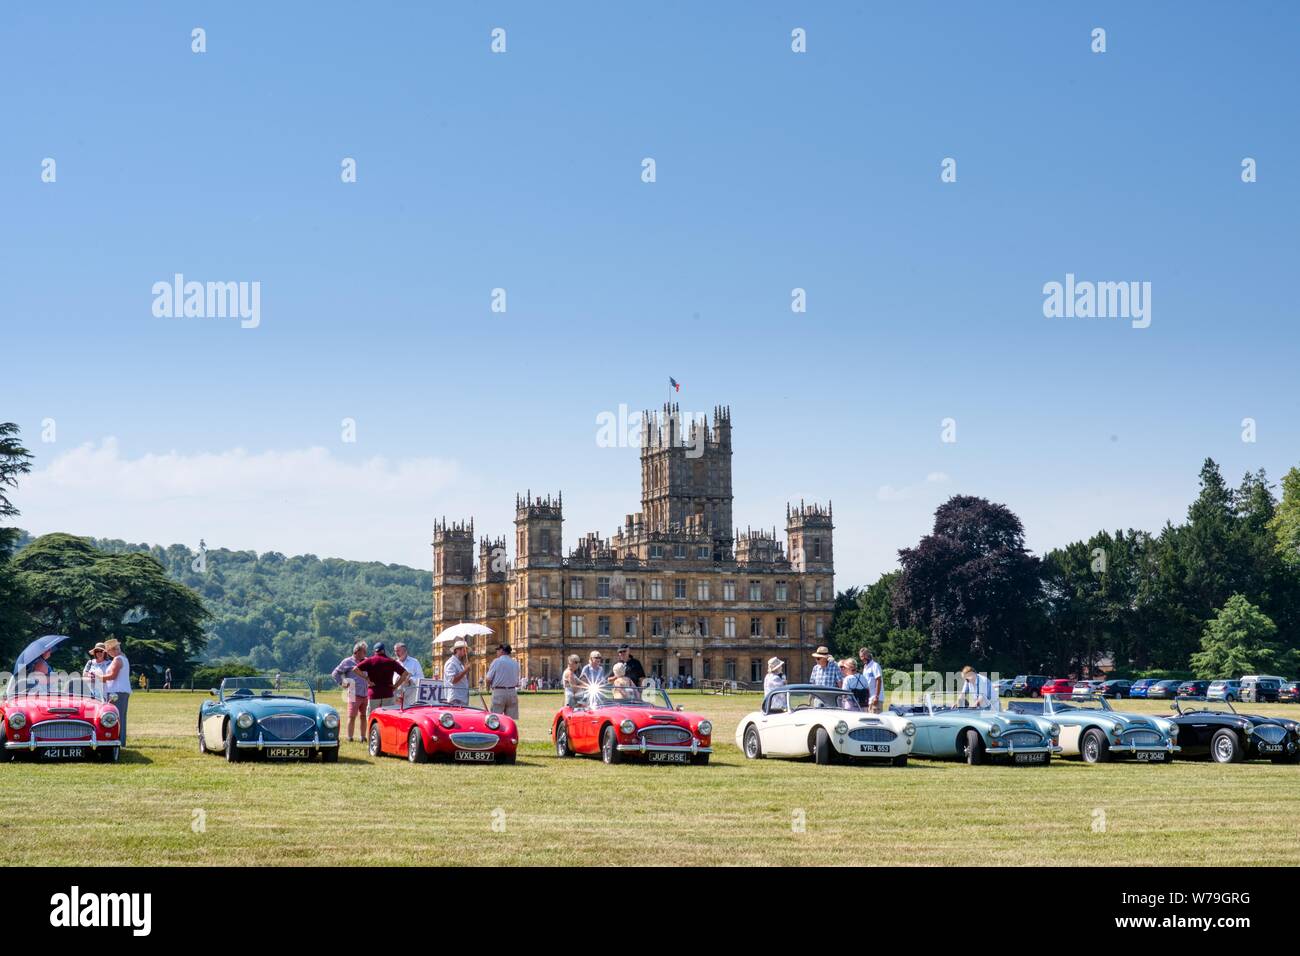 Austin Healey sports cars parked on the lawn at Highclere Castle, scene of the Downton Abbey film, Hampshire, UK Stock Photo